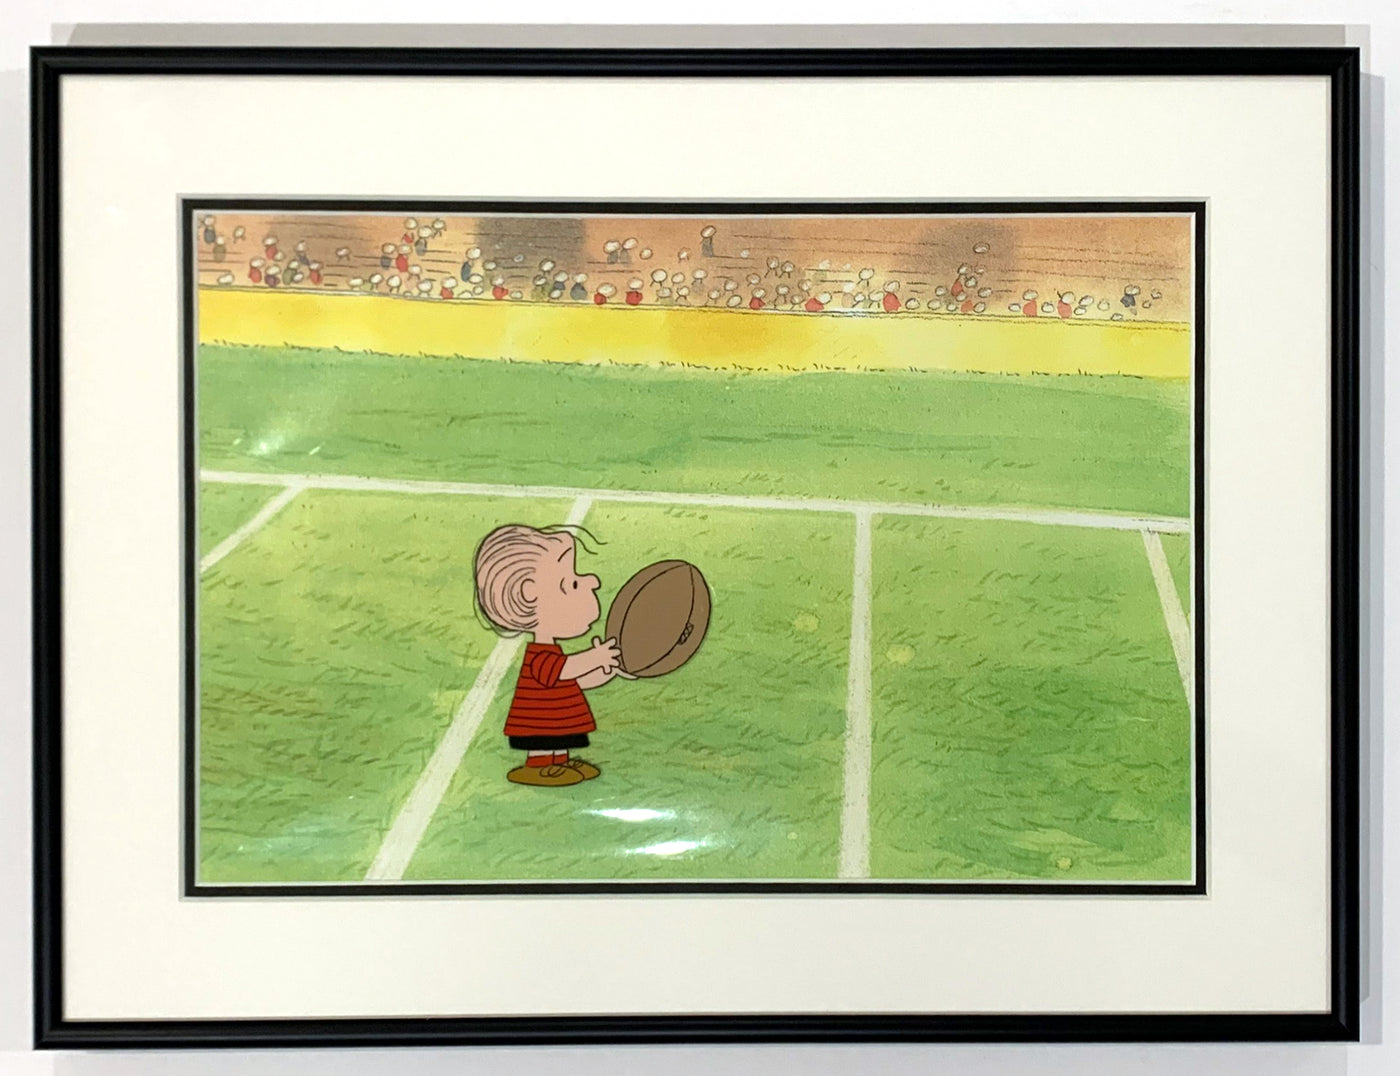 Original Peanuts Production Cel and Matching Production Drawing from The Charlie Brown and Snoopy Show featuring Linus